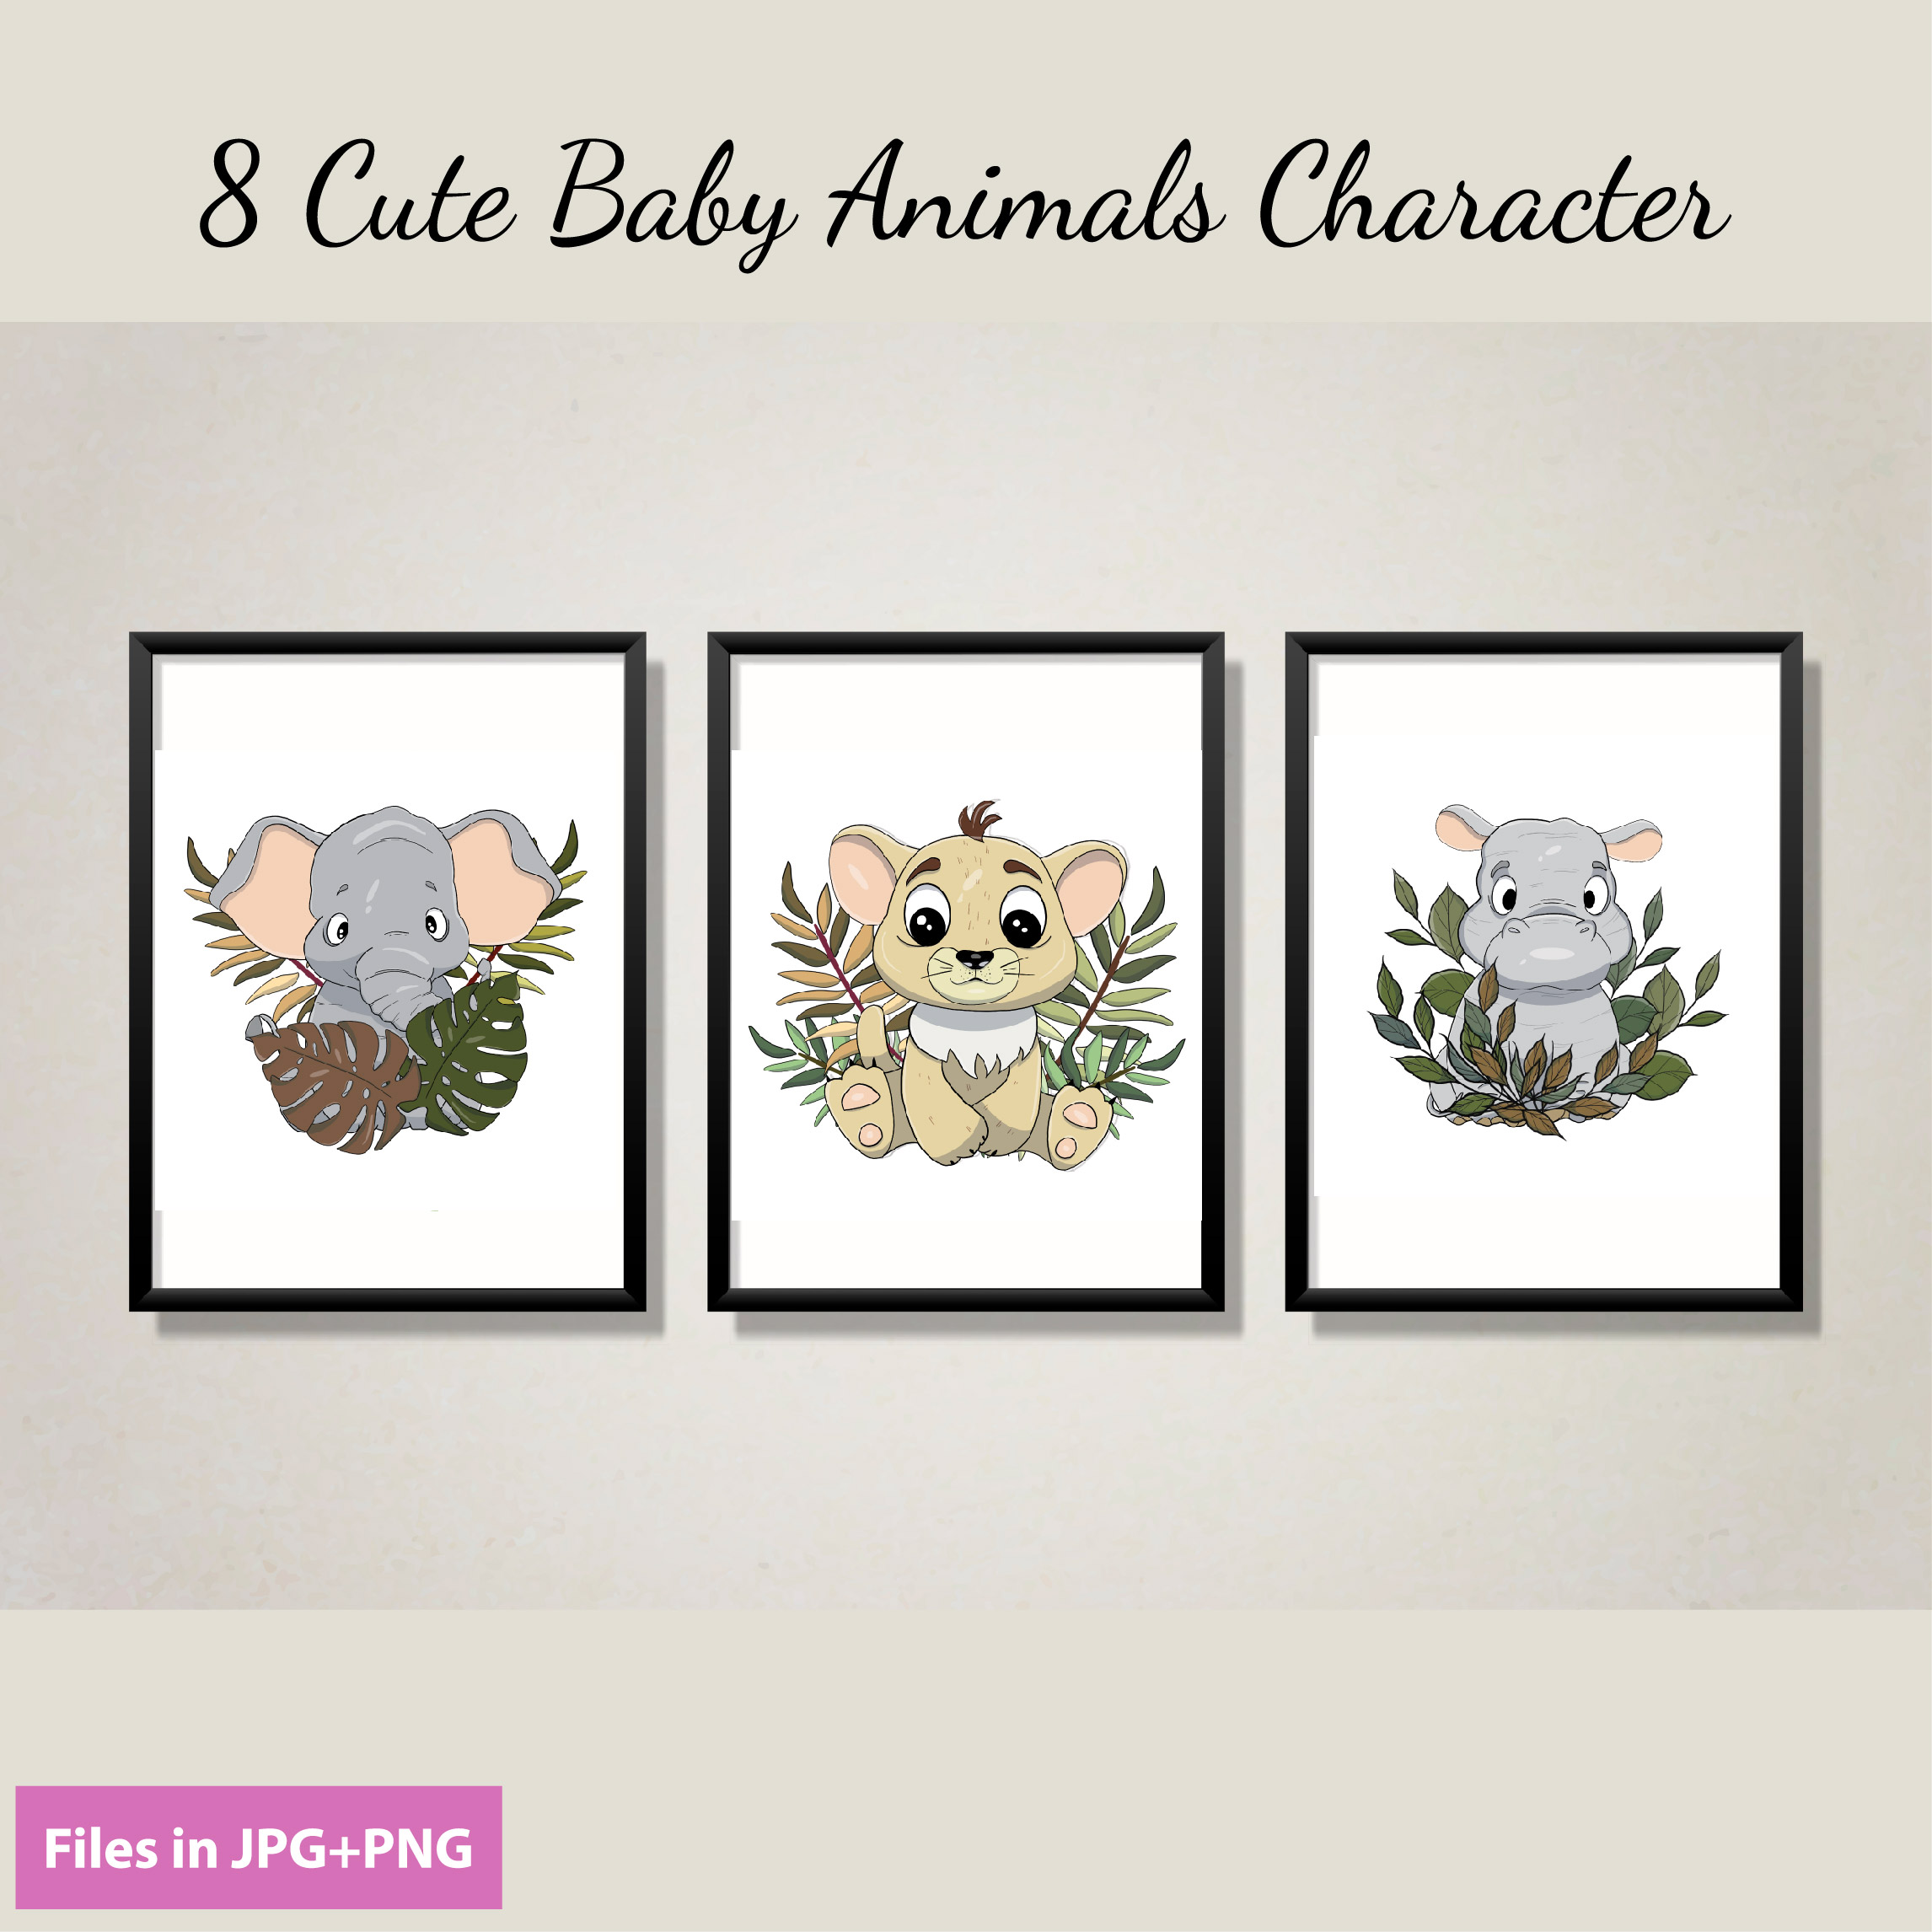 Little Animals Character Design cover image.